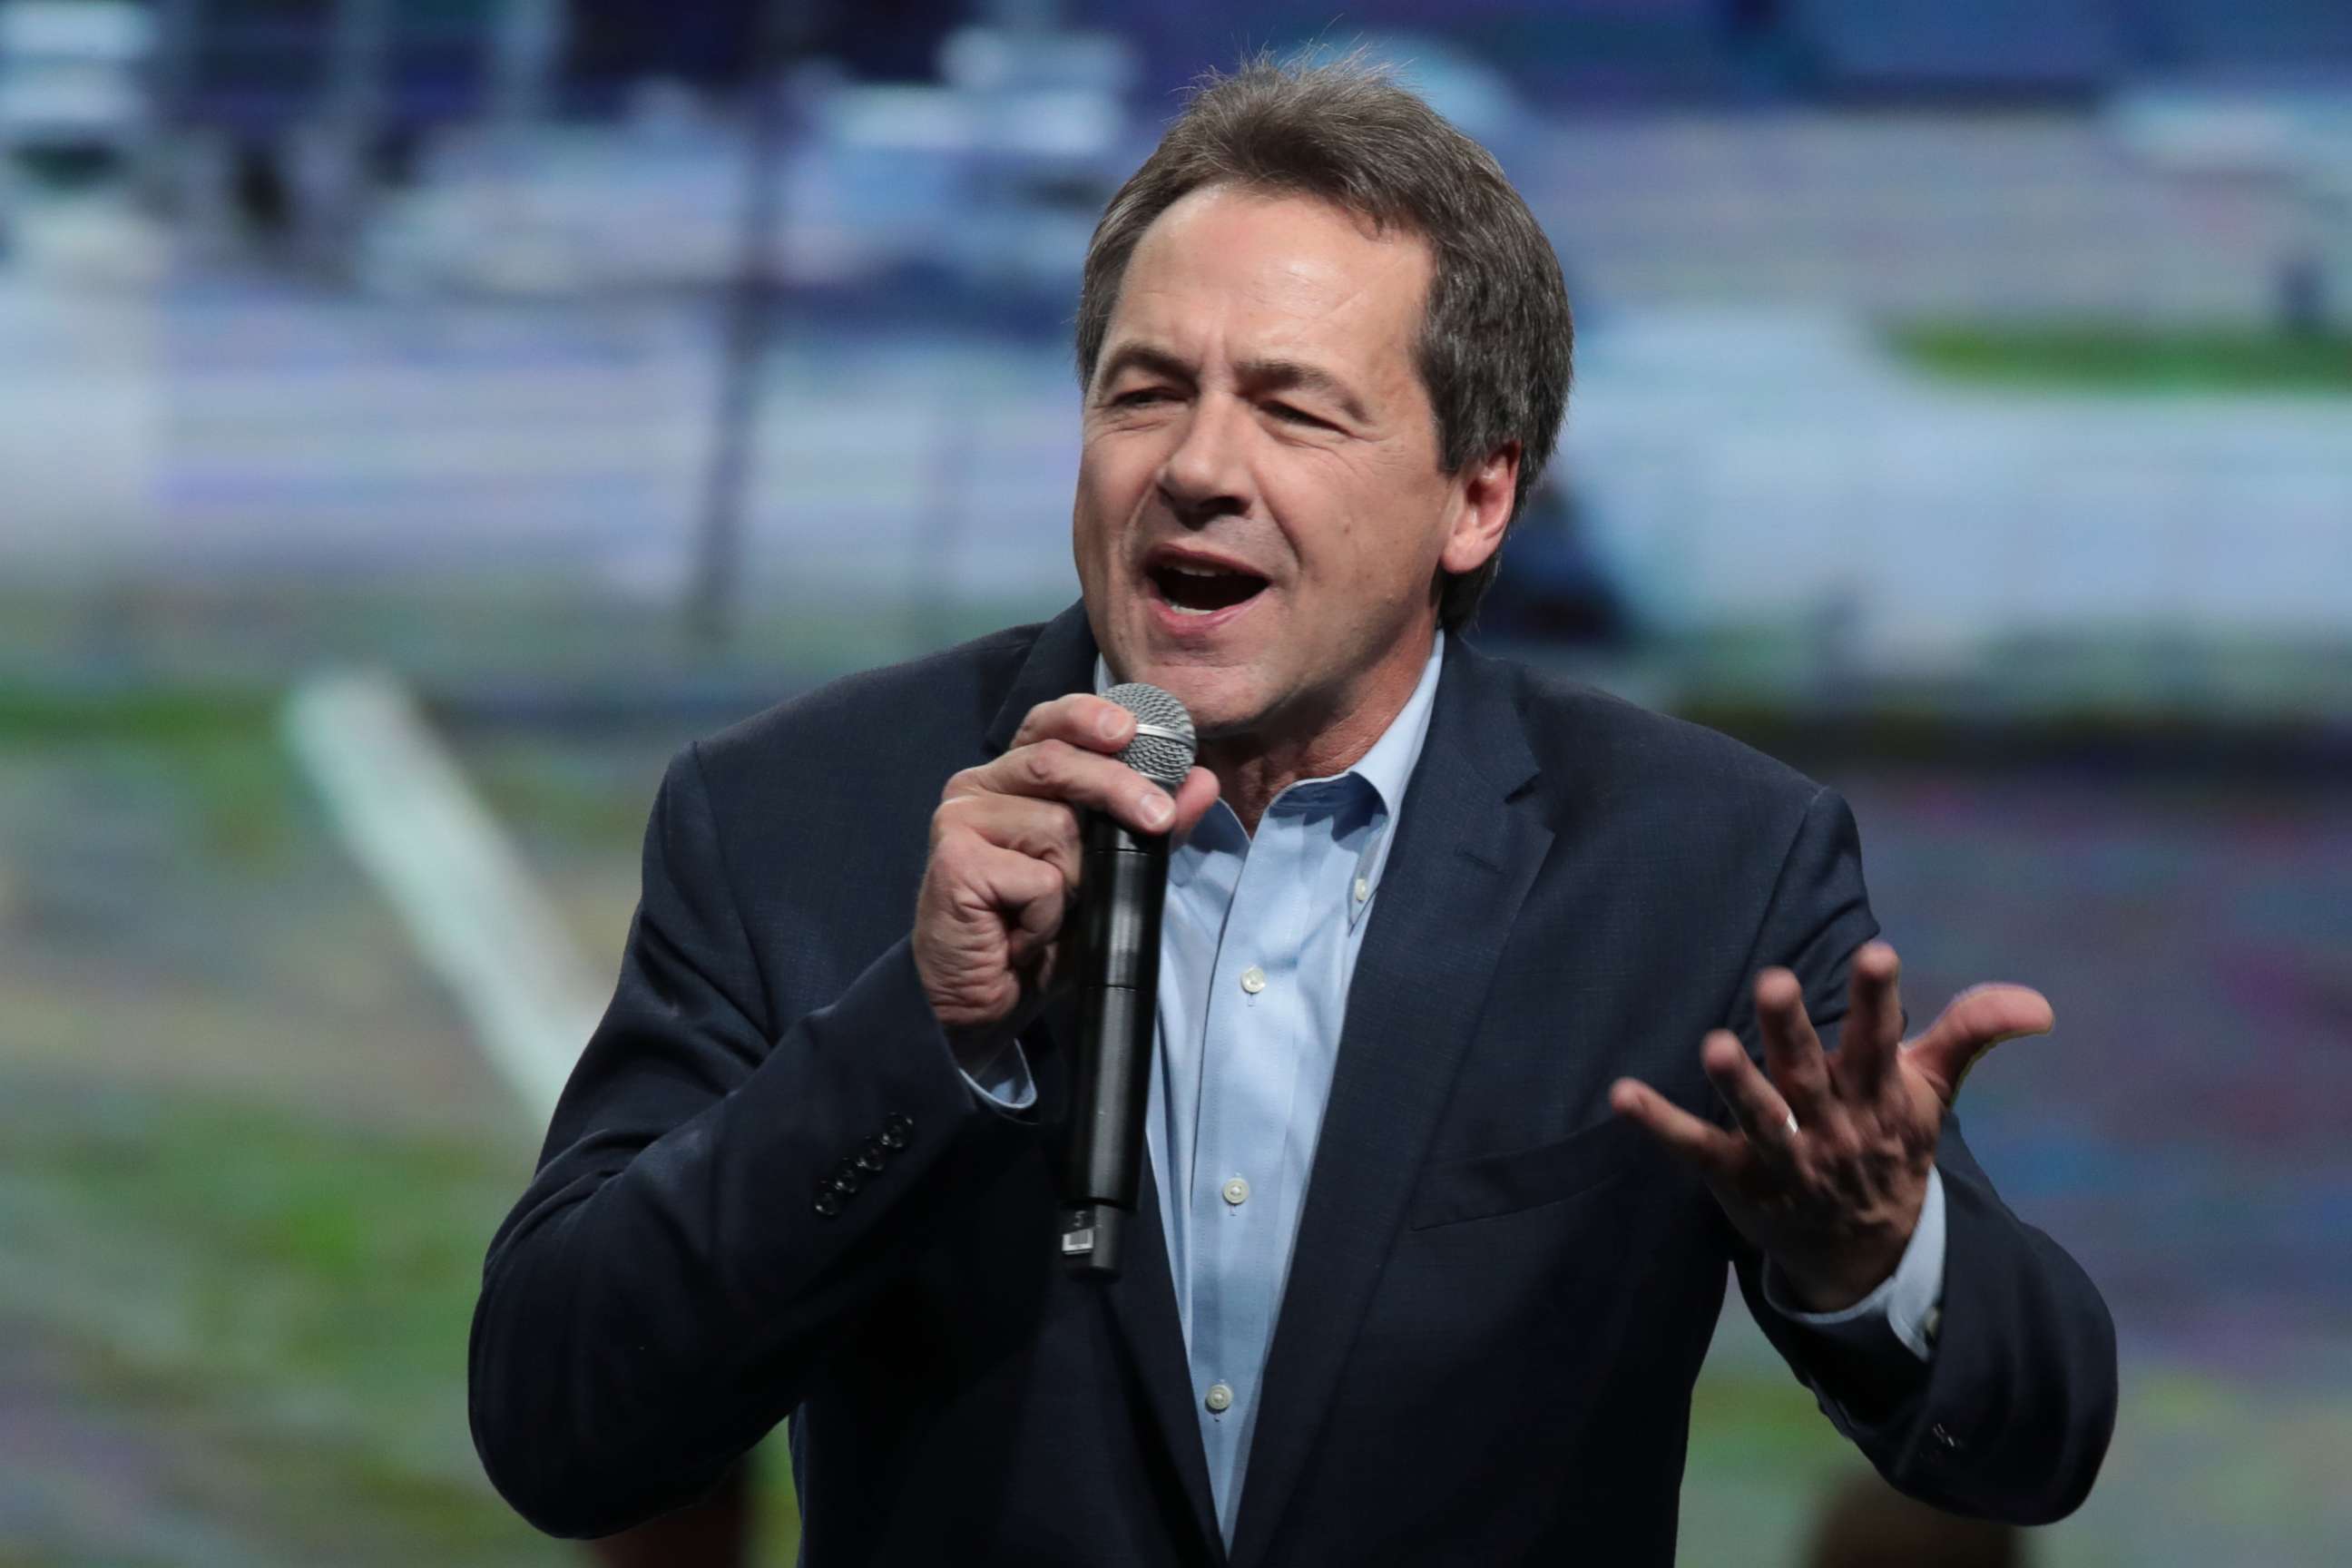 PHOTO: Democratic presidential candidate Montana Gov. Steve Bullock speaks at the Liberty and Justice Celebration at the Wells Fargo Arena on Nov. 1, 2019, in Des Moines, Iowa.